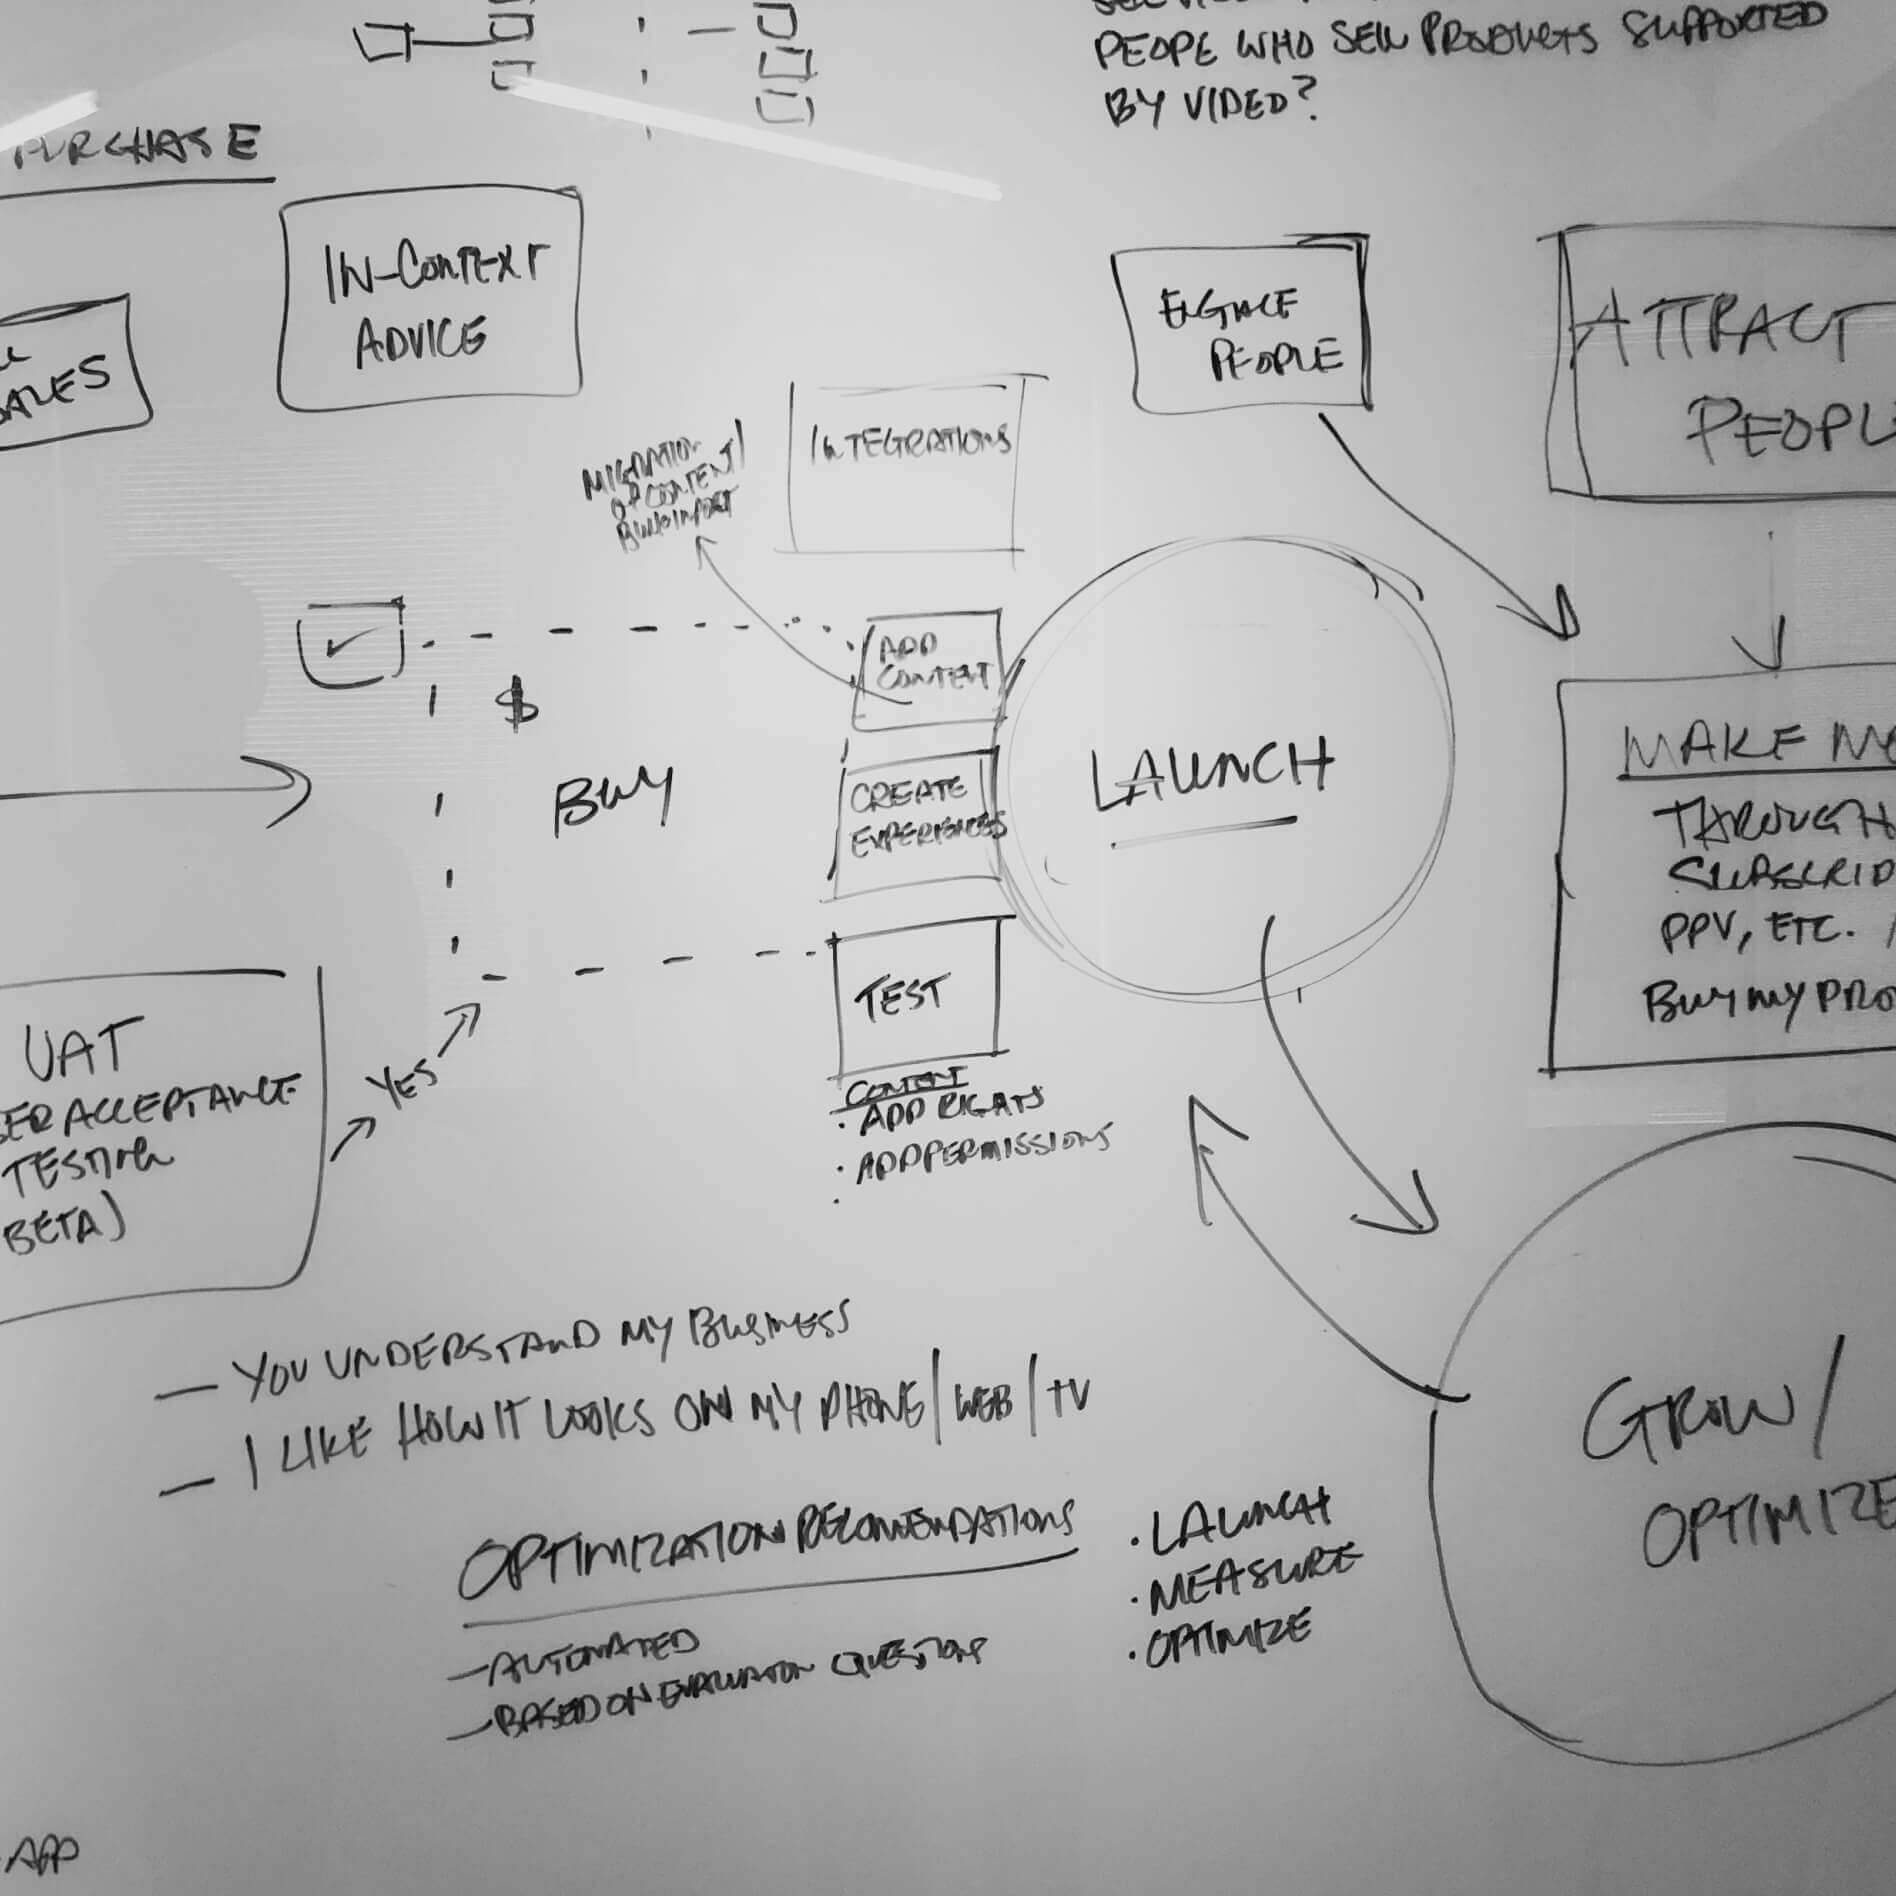 A whiteboard photo showing sketches and notes from a brainstorming session around attracting new users